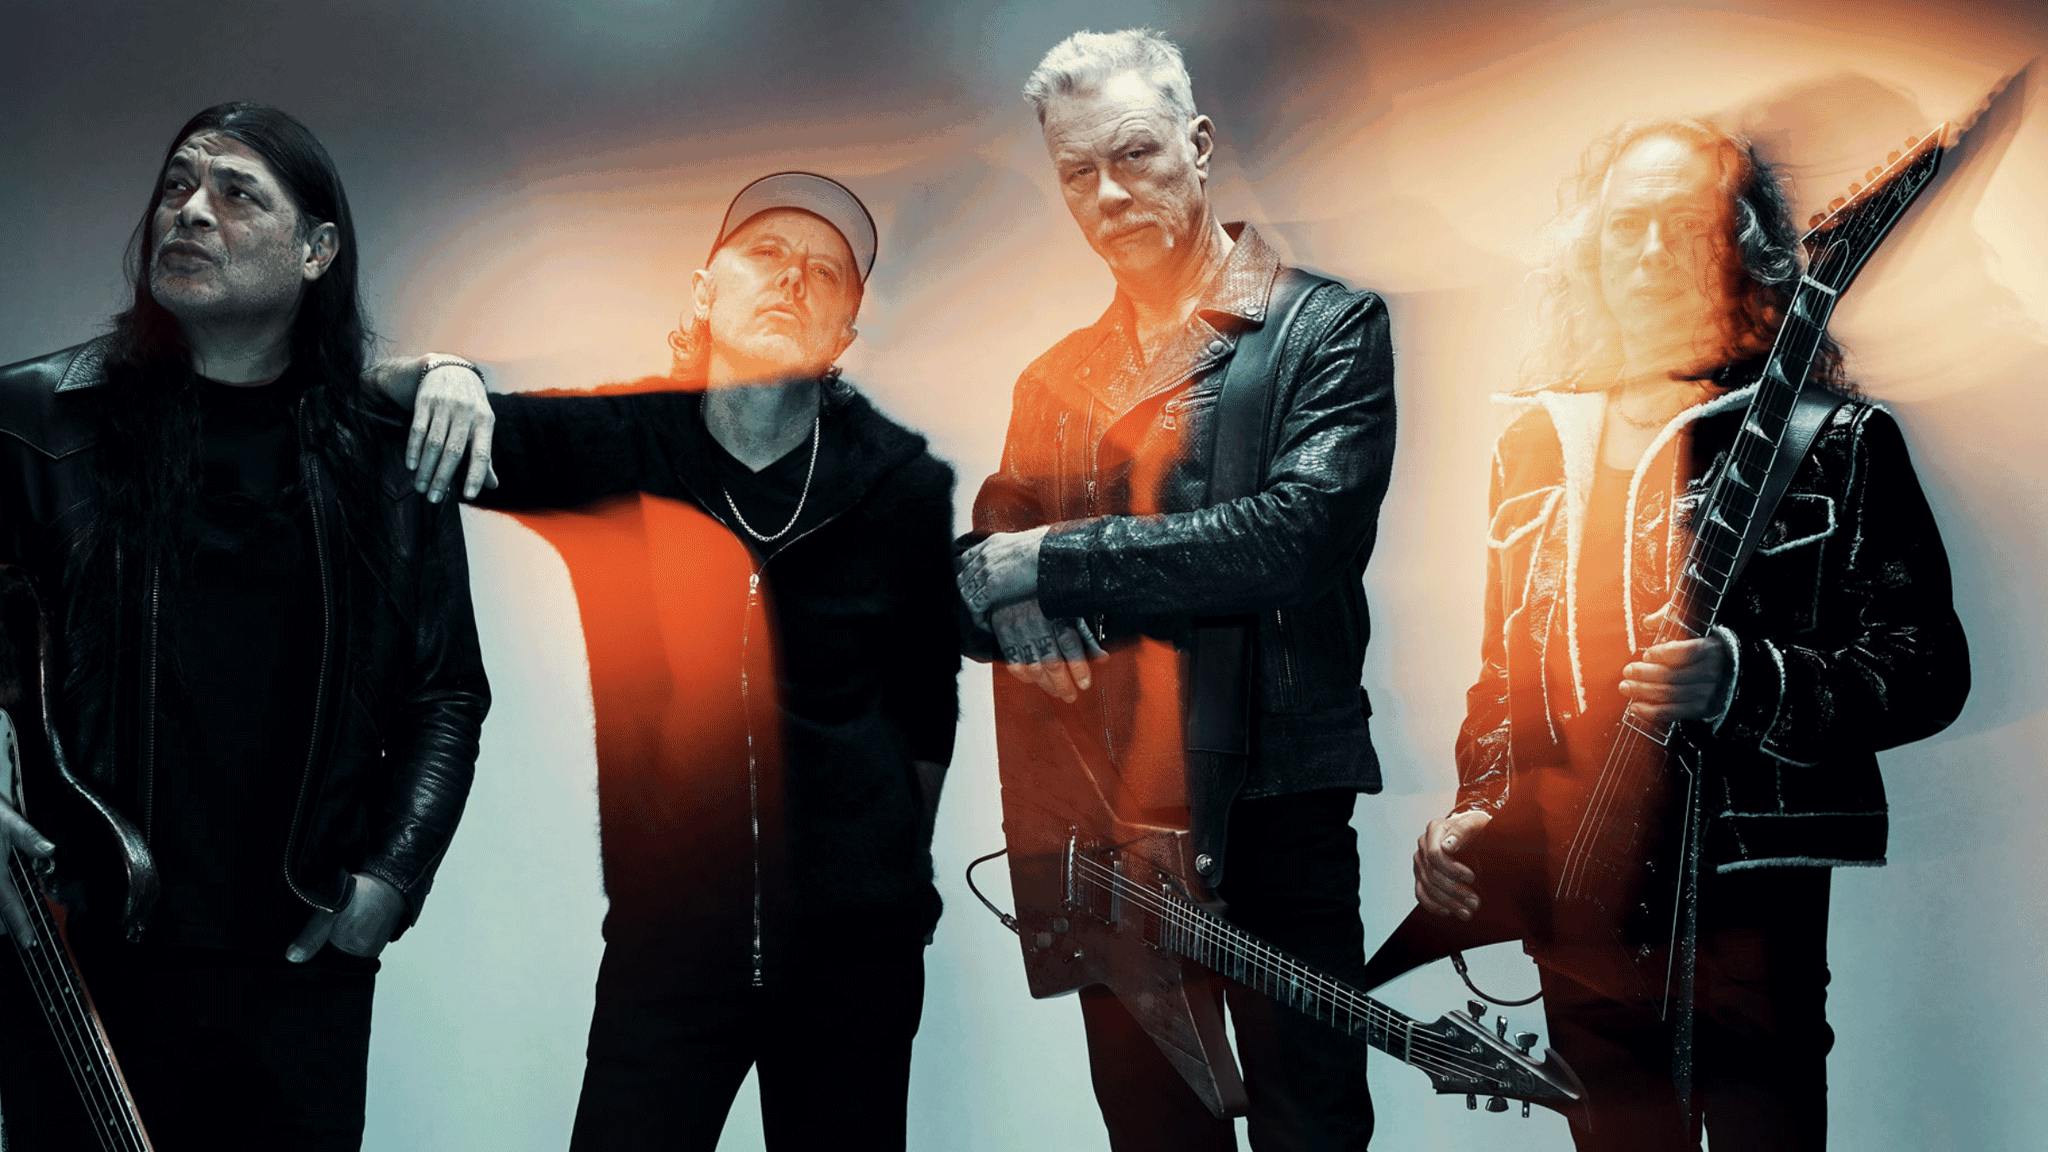 Metallica to bring their M72 World Tour to cinemas for two nights